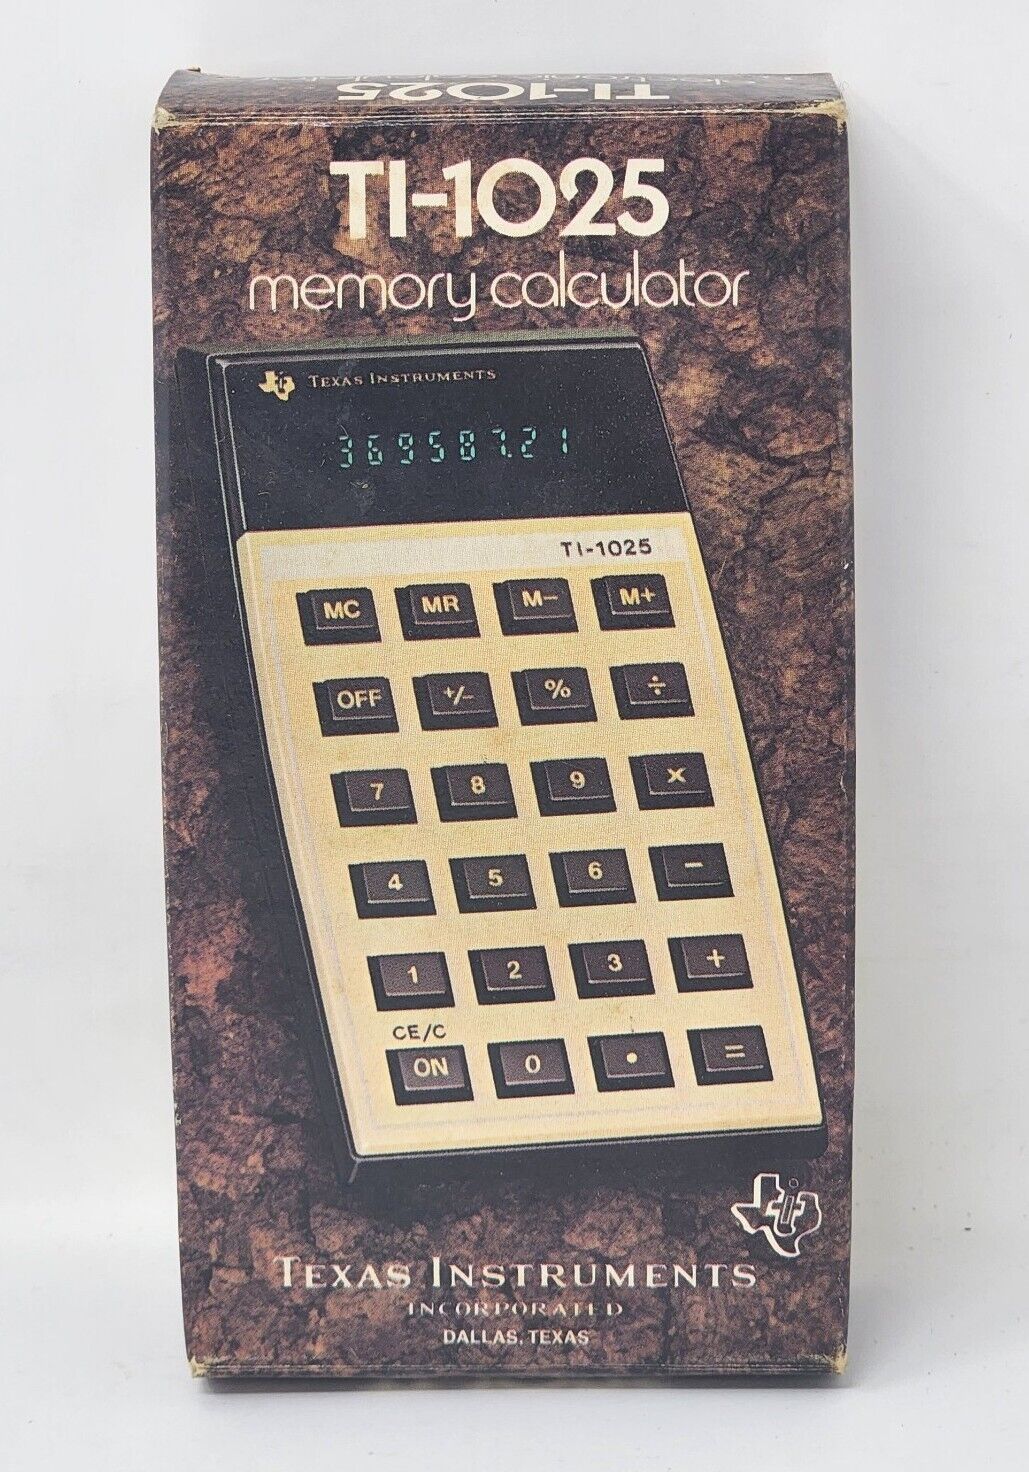 Texas Instruments Incorporated Memory Calculator TI-1025 Vintage 1977